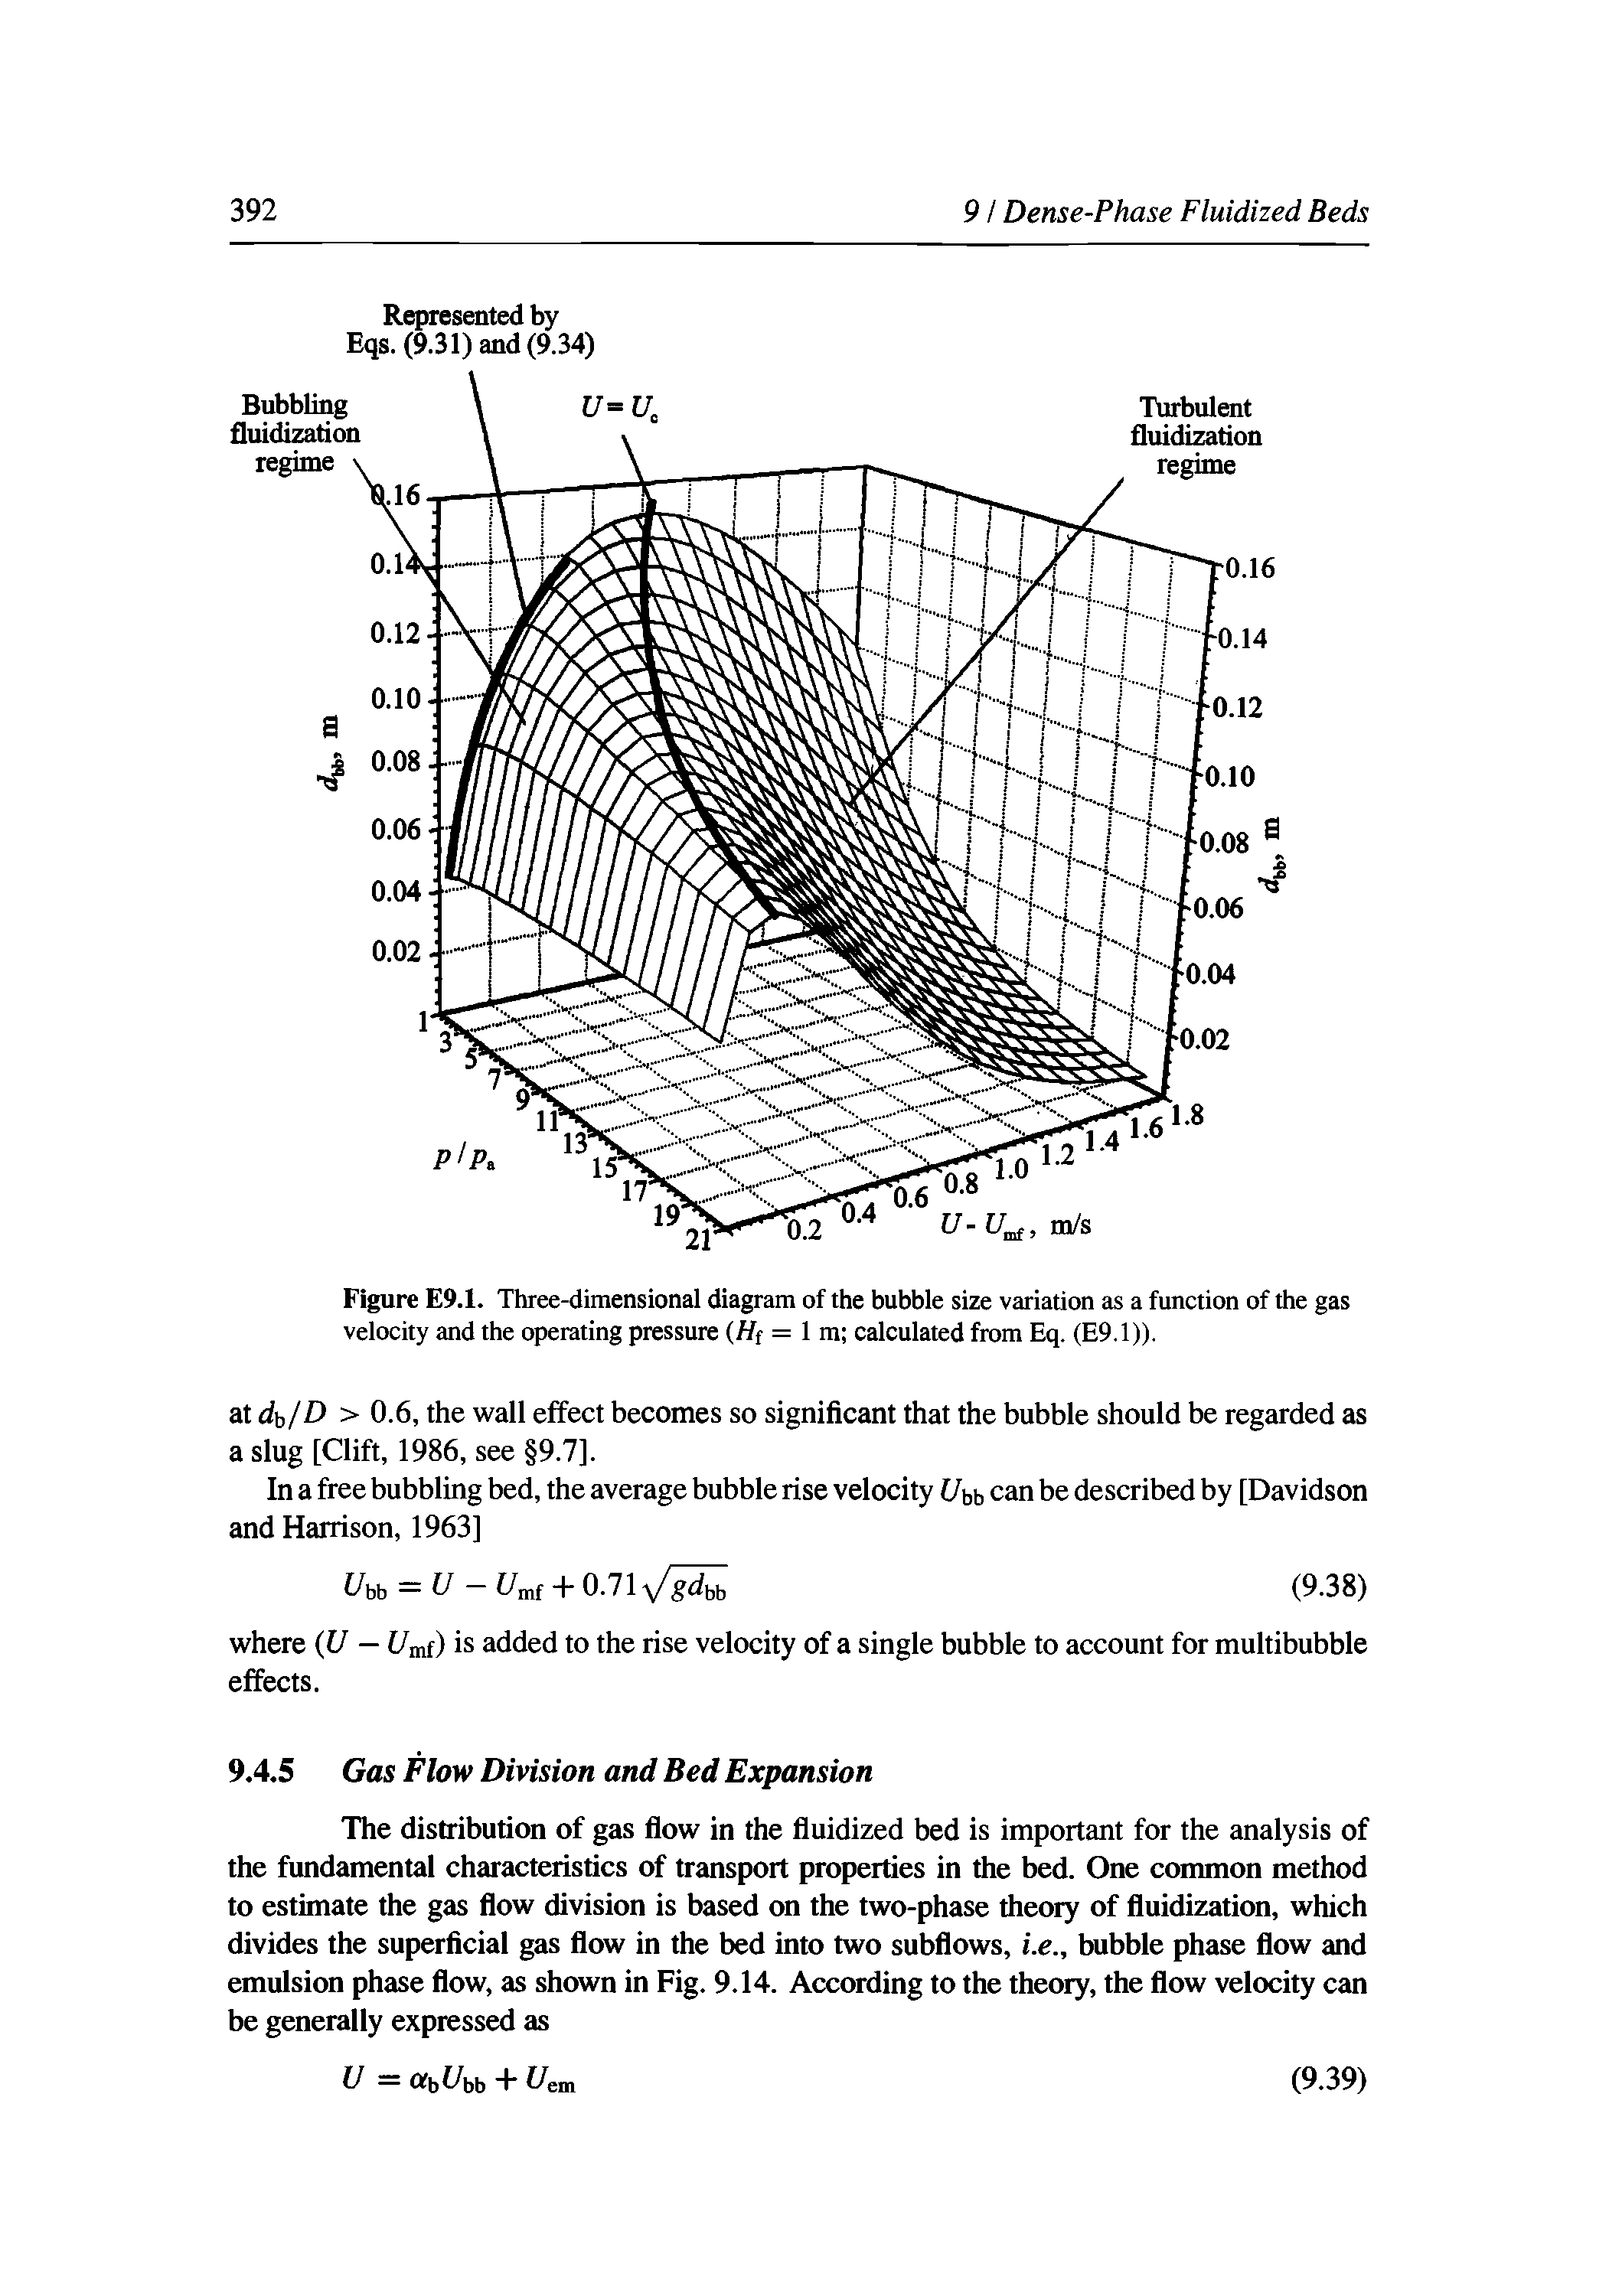 Figure E9.1. Three-dimensional diagram of the bubble size variation as a function of the gas velocity and the operating pressure (Hf = 1 m calculated from Eq. (E9.1)).